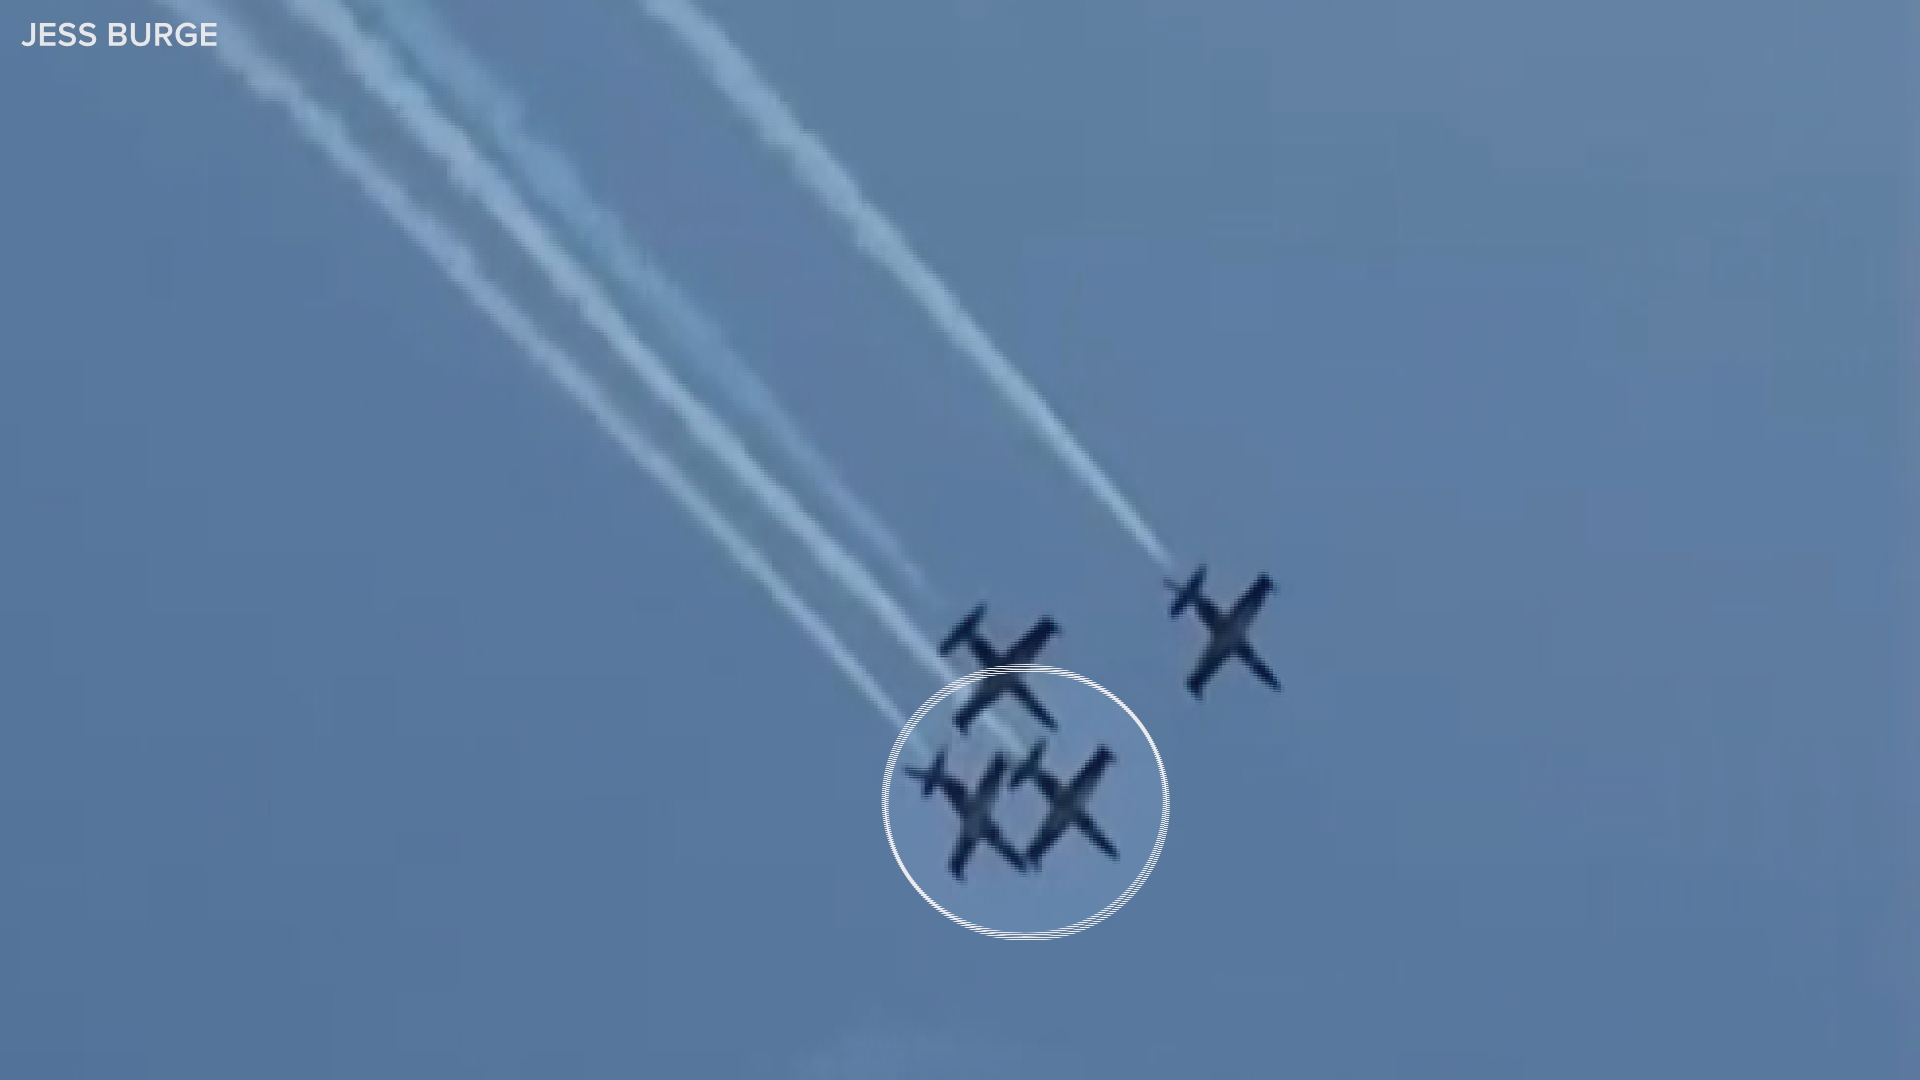 Video taken by Jess Burge shows the moment two Ghost Squadron jets clipped each others' wings at the Fort Lauderdale Air Show.